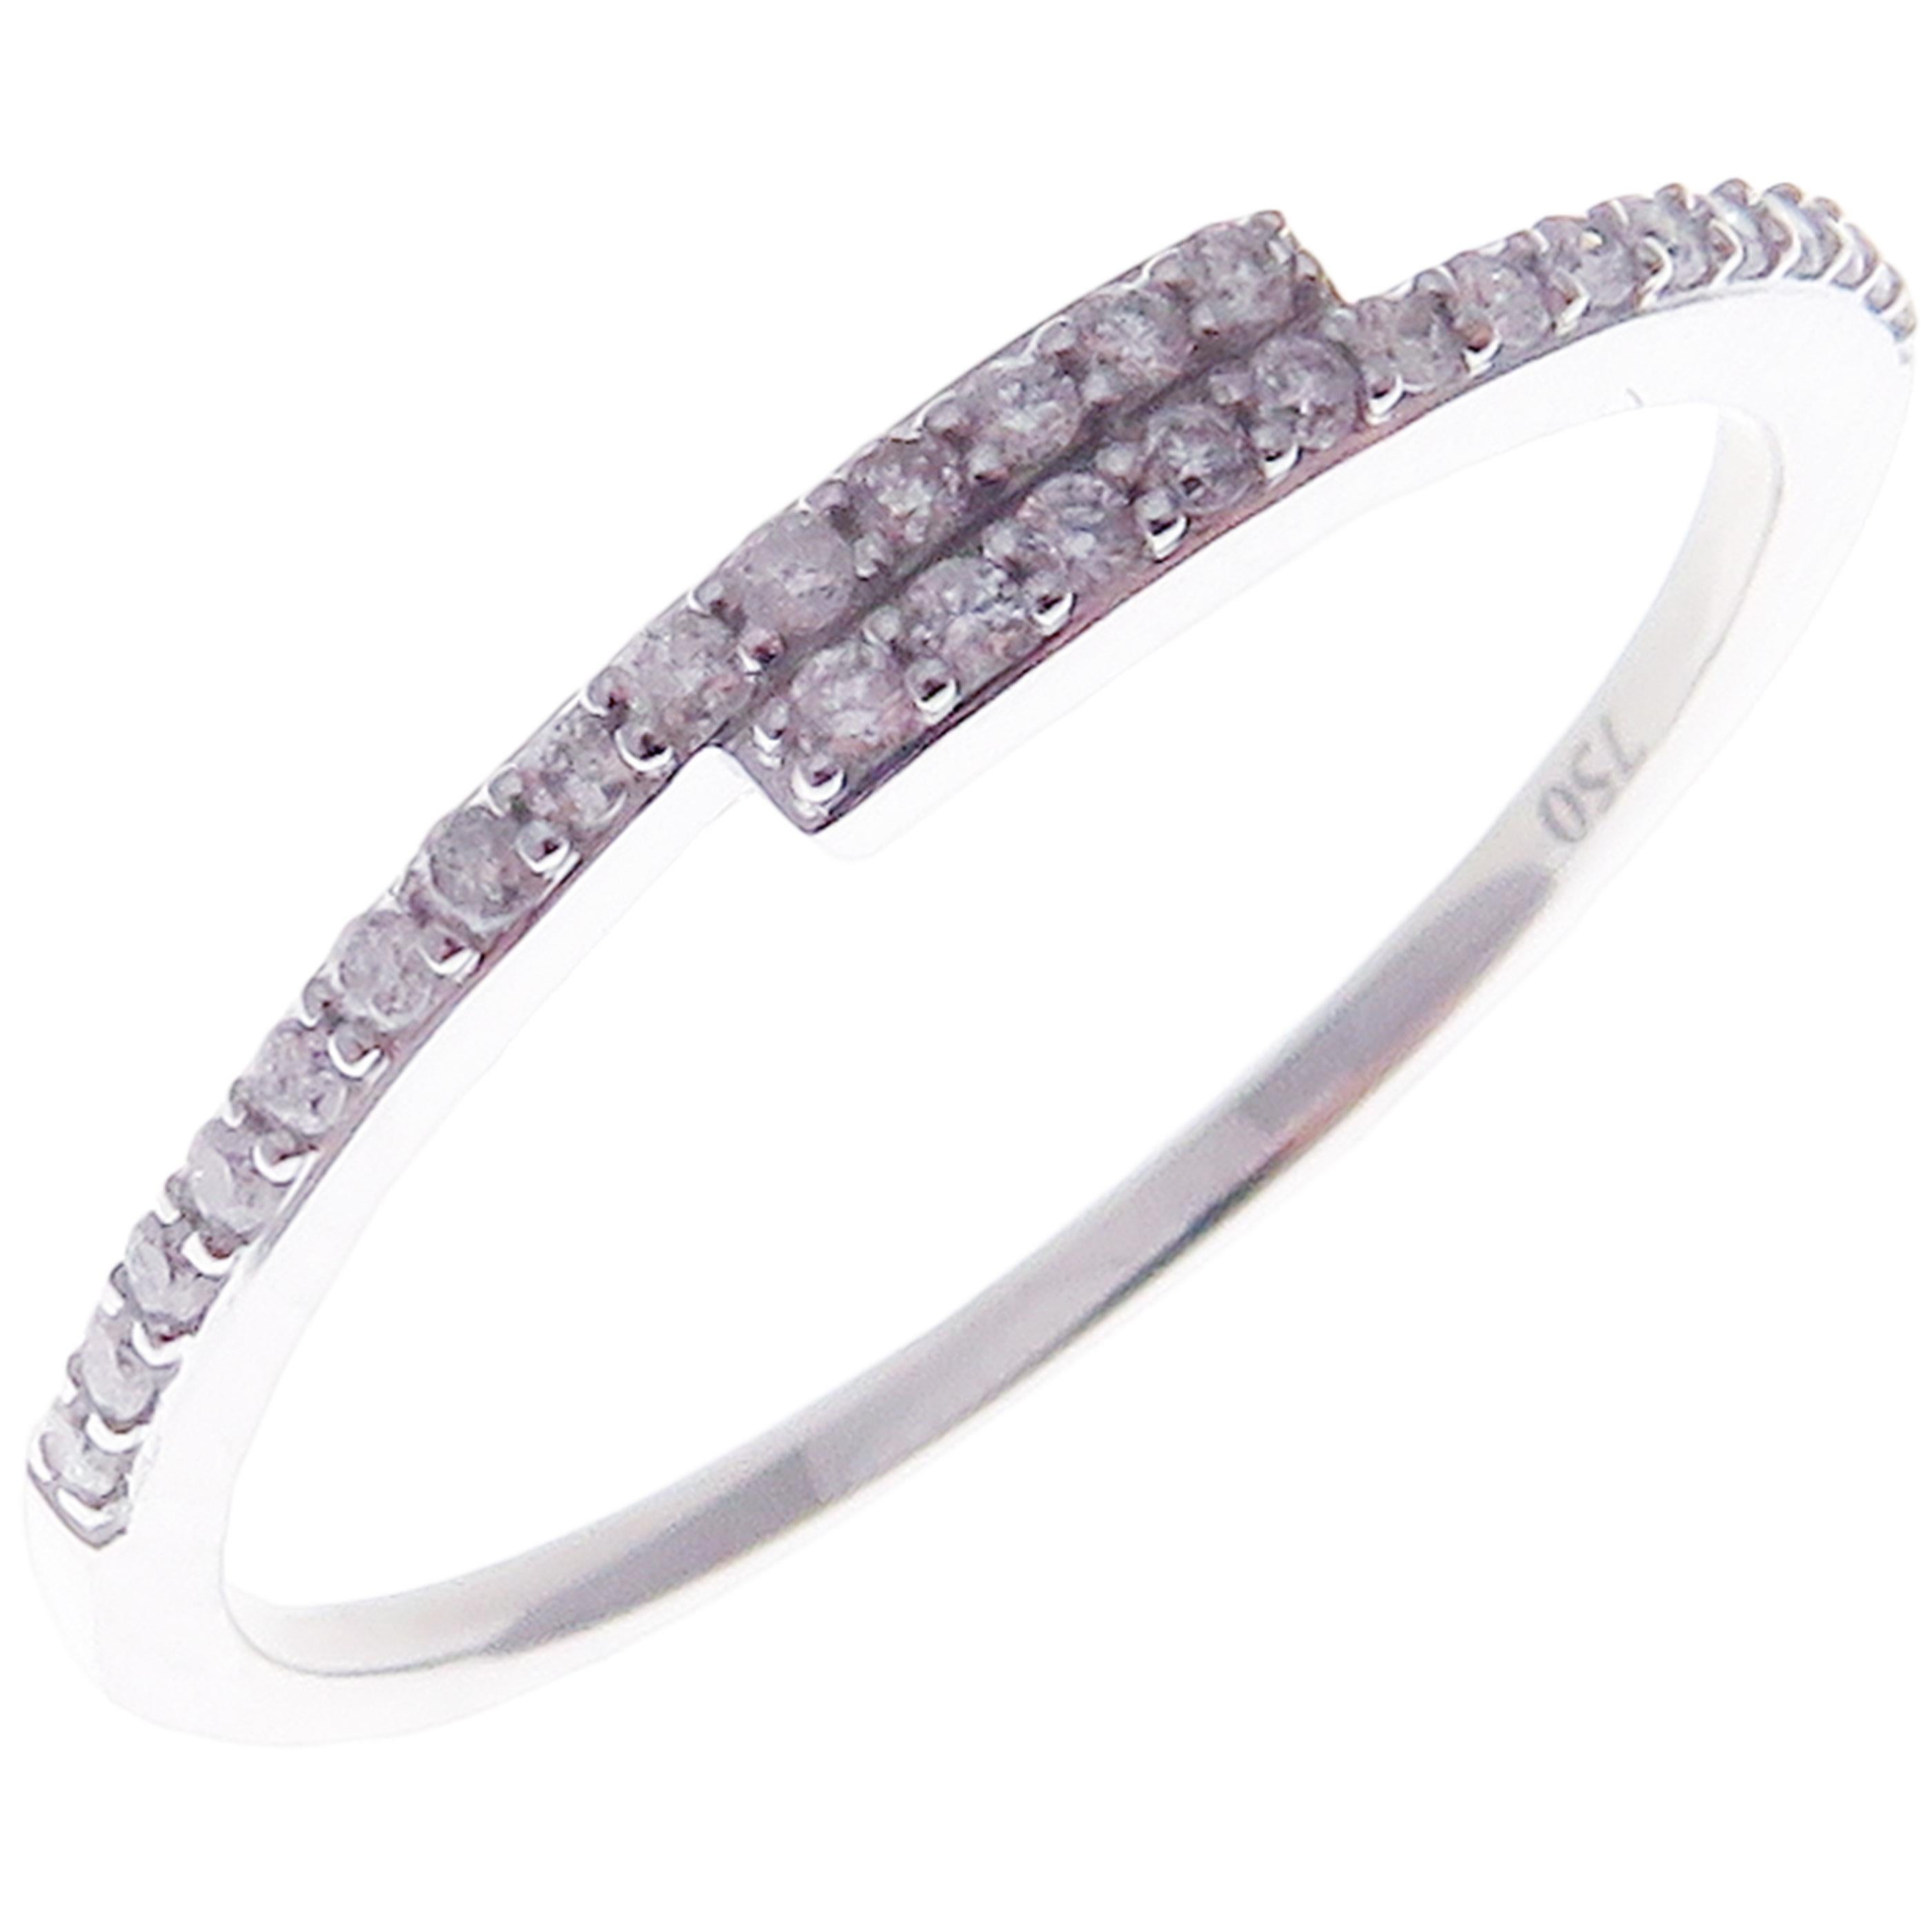 This simple stackable bypass ring is crafted in 18-karat white gold, featuring 28 round white diamonds totaling of 0.14 carats.
Approximate total weight 1.58 grams.
Standard Ring size 7
SI-G Quality natural white diamonds.